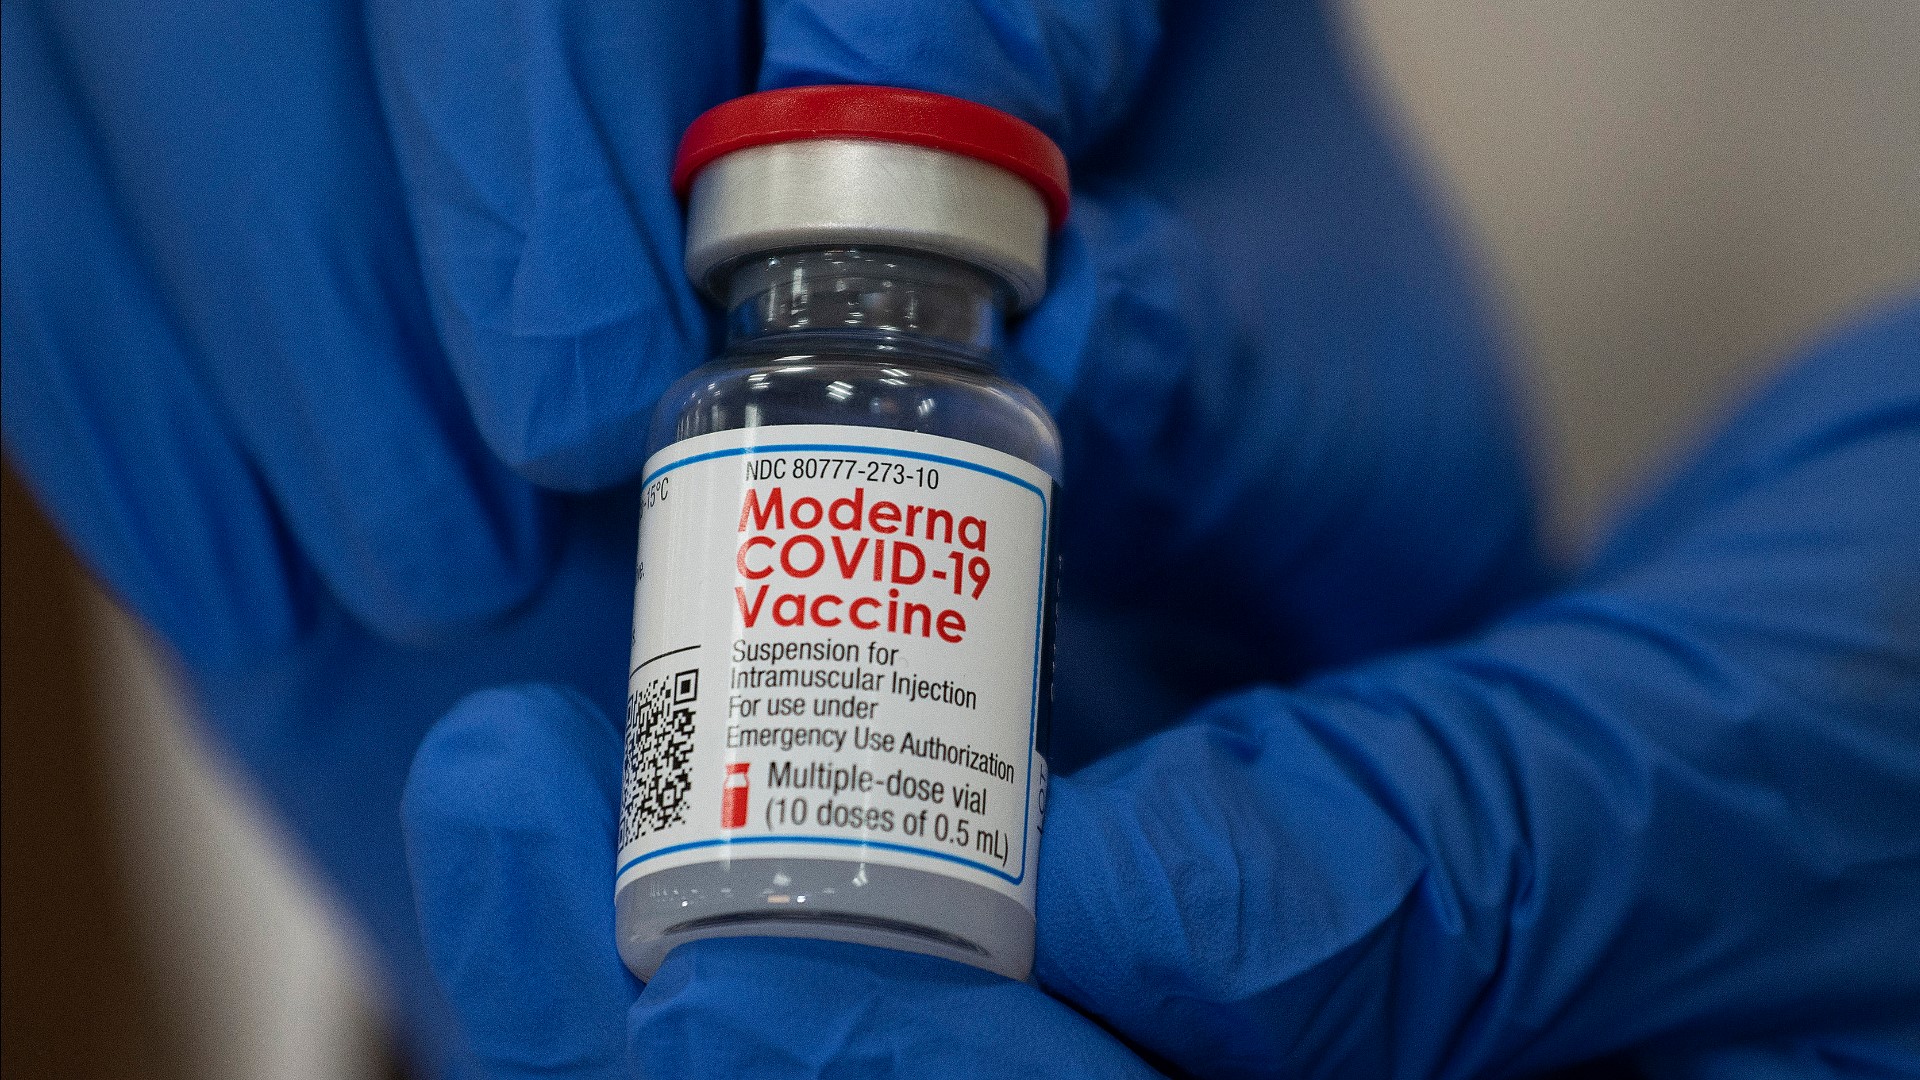 Indiana hospitals are beginning to get shipments of Moderna's COVID-19 vaccine, and it's just in time, as they were running out of Pfizer shots.